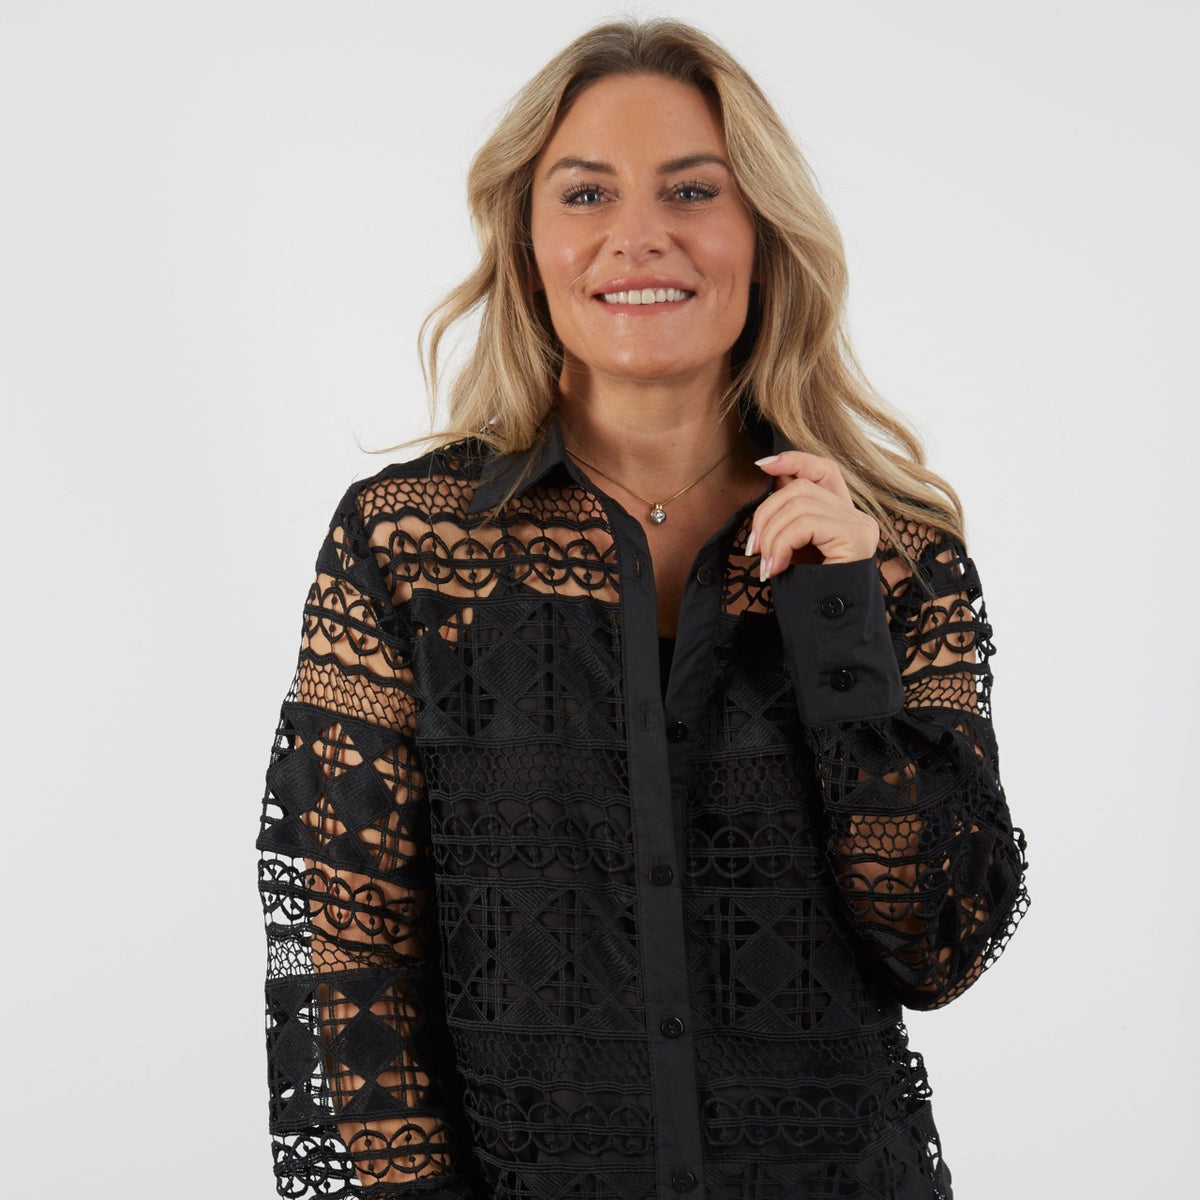 BLACK LACE SHIRT WITH CAMISOLE